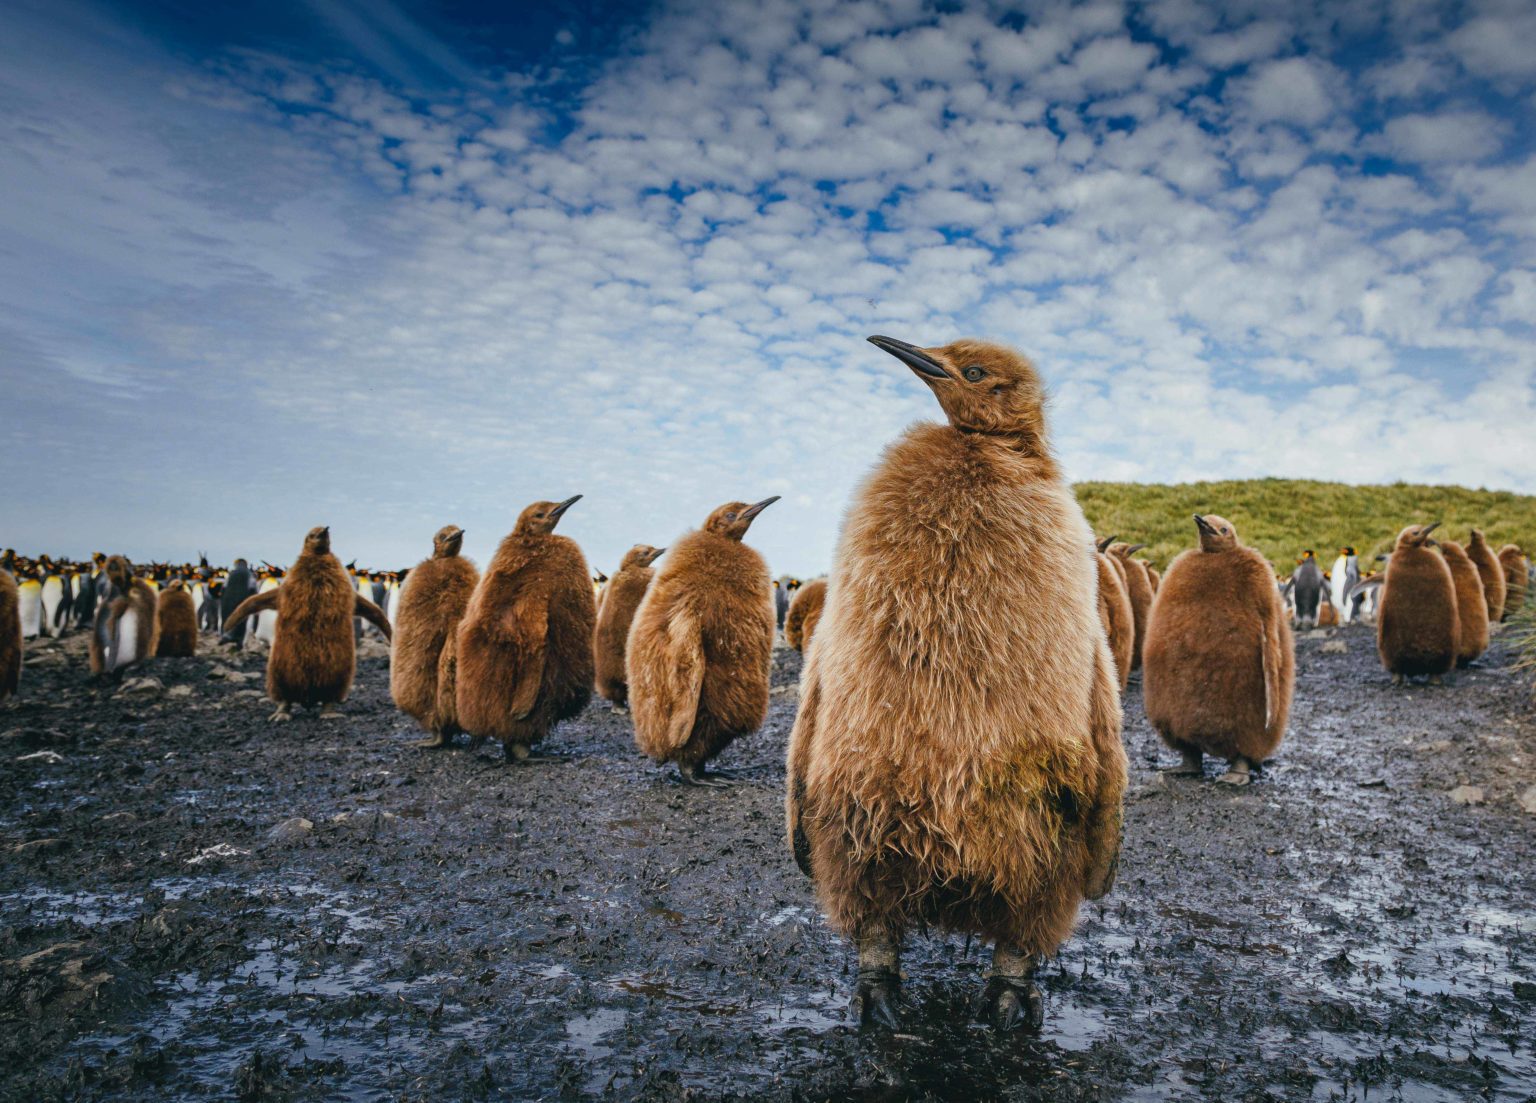 spaced out colony of brown fluffy King penguin chicks standing curiously in the mud